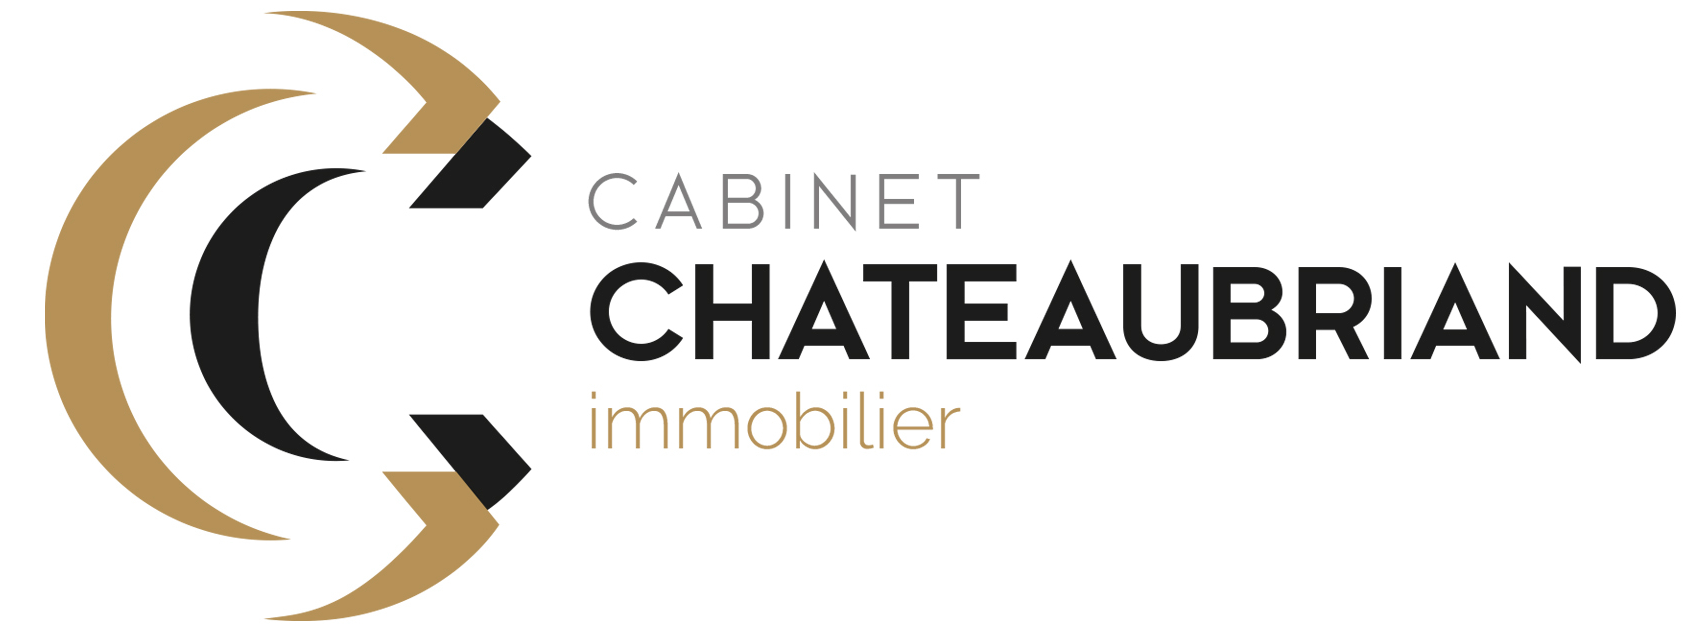 Agence immobilière cabinet_chateaubriand